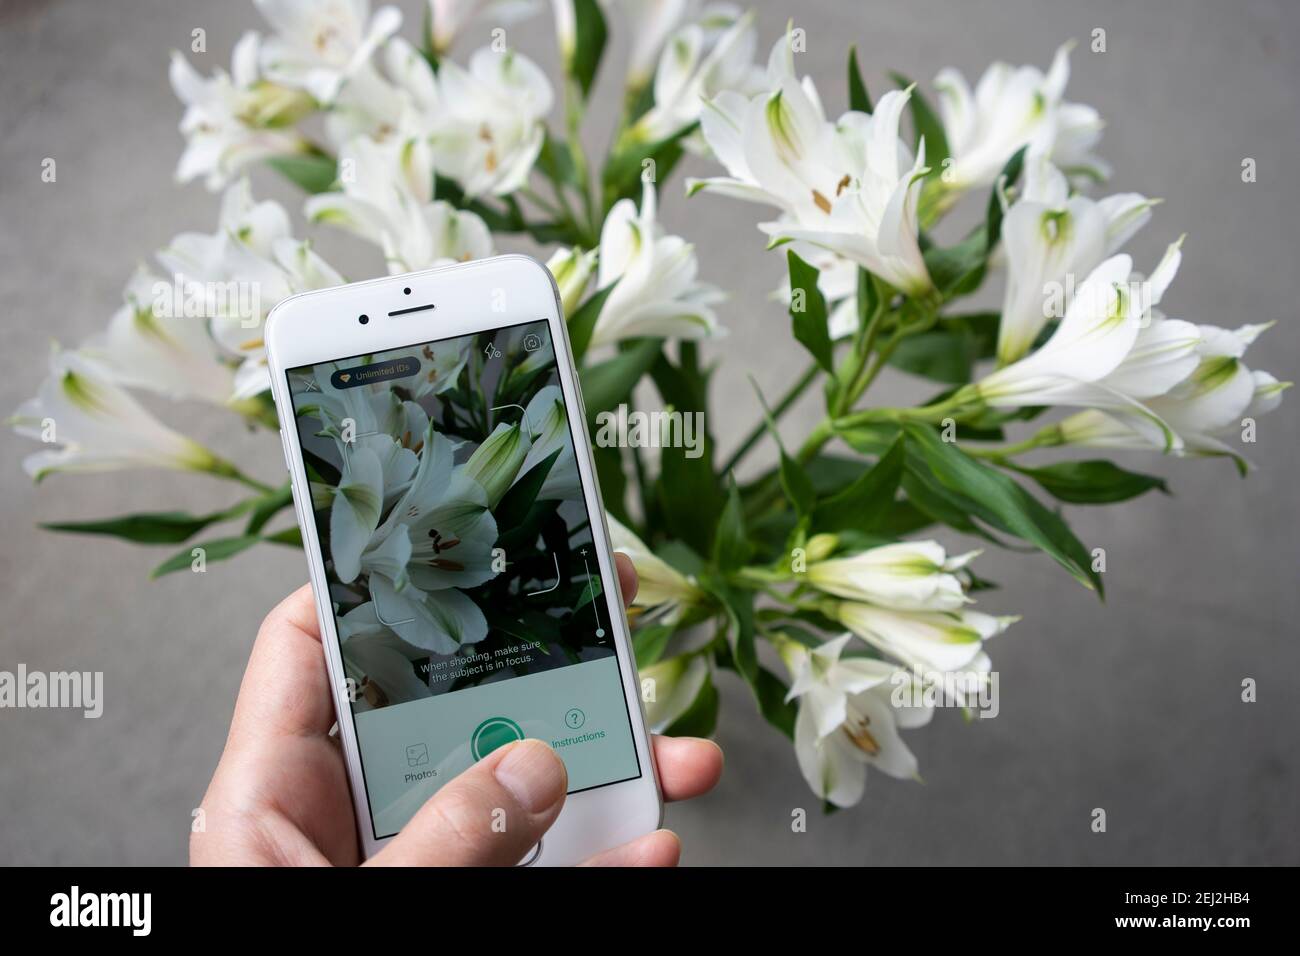 An anthophile tests the PictureThis app on an iPhone to identify a flower. The flower in the picture is Peruvian lily (lily of the Incas). Stock Photo